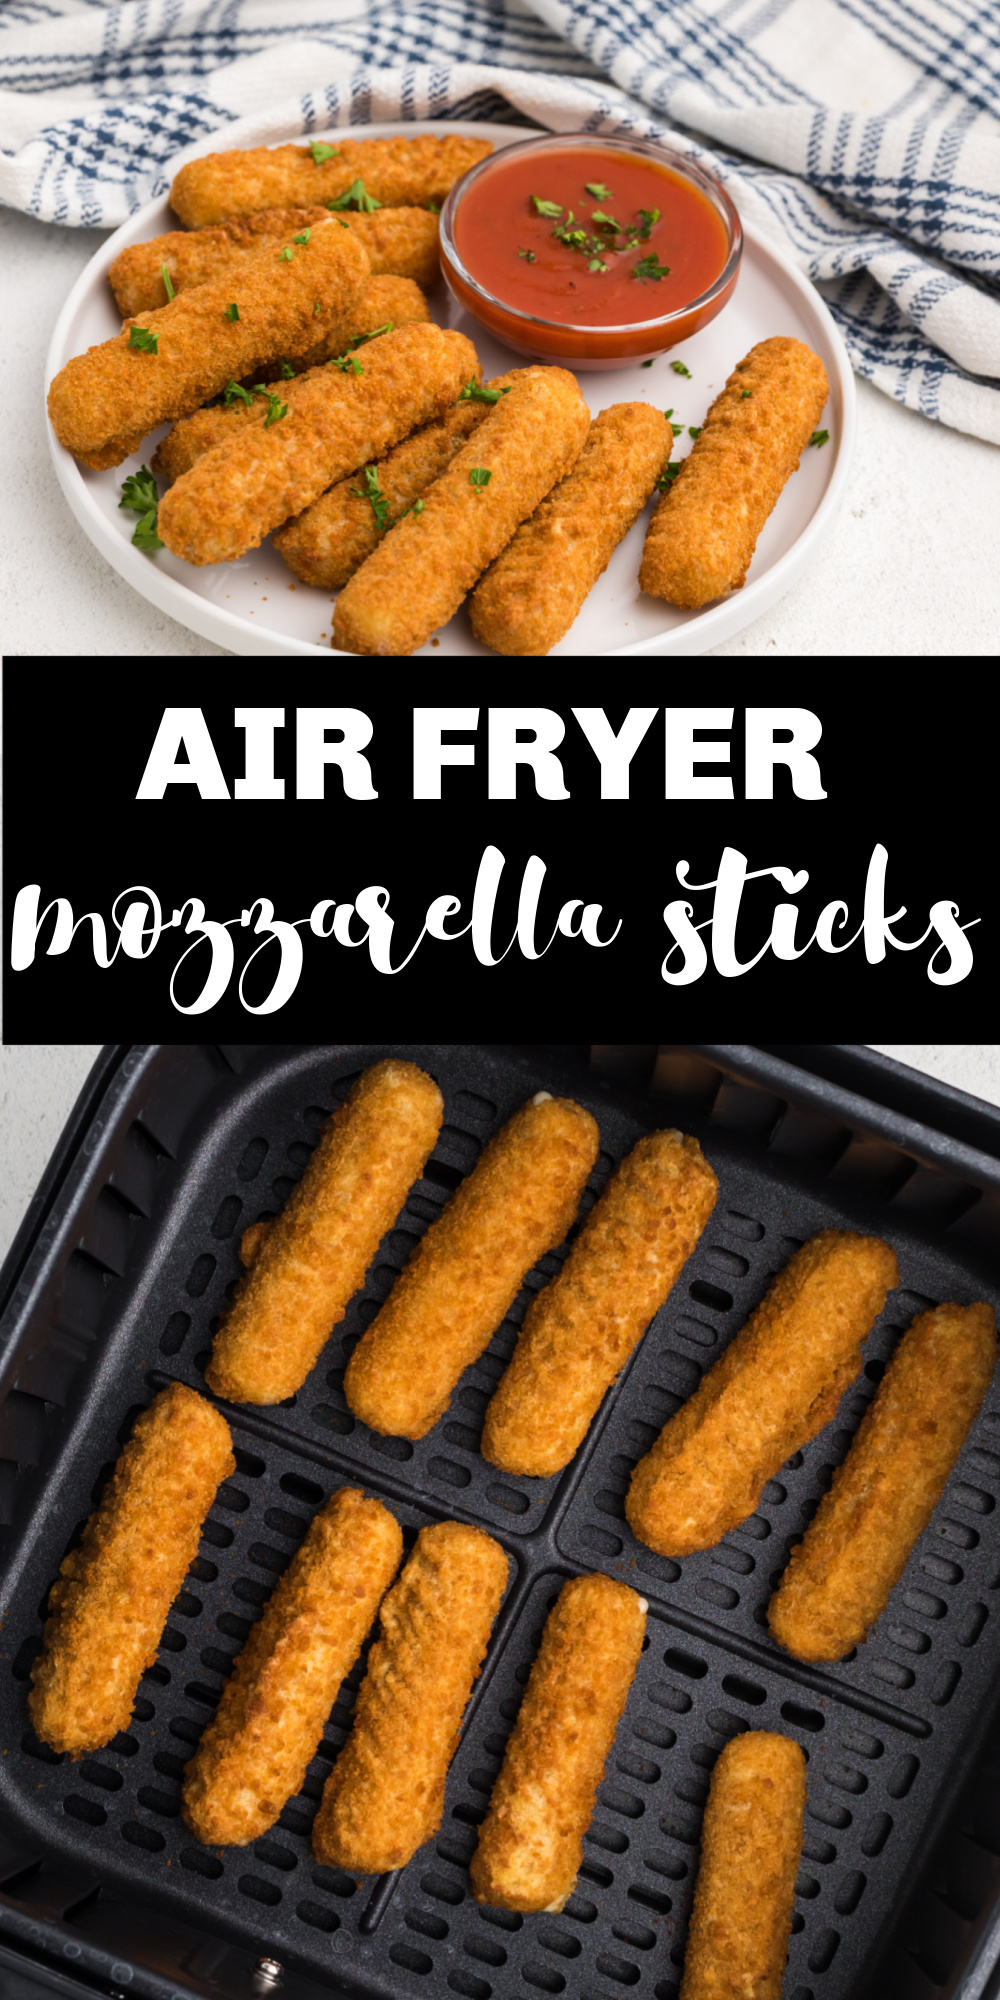 Frozen Mozzarella Sticks In the Air Fryer! You literally just need one ingredient and your air fryer appliance - that's it! This delicious appetizer can be a fast dinner recipe, too! It's seriously such an easy air fryer recipe.